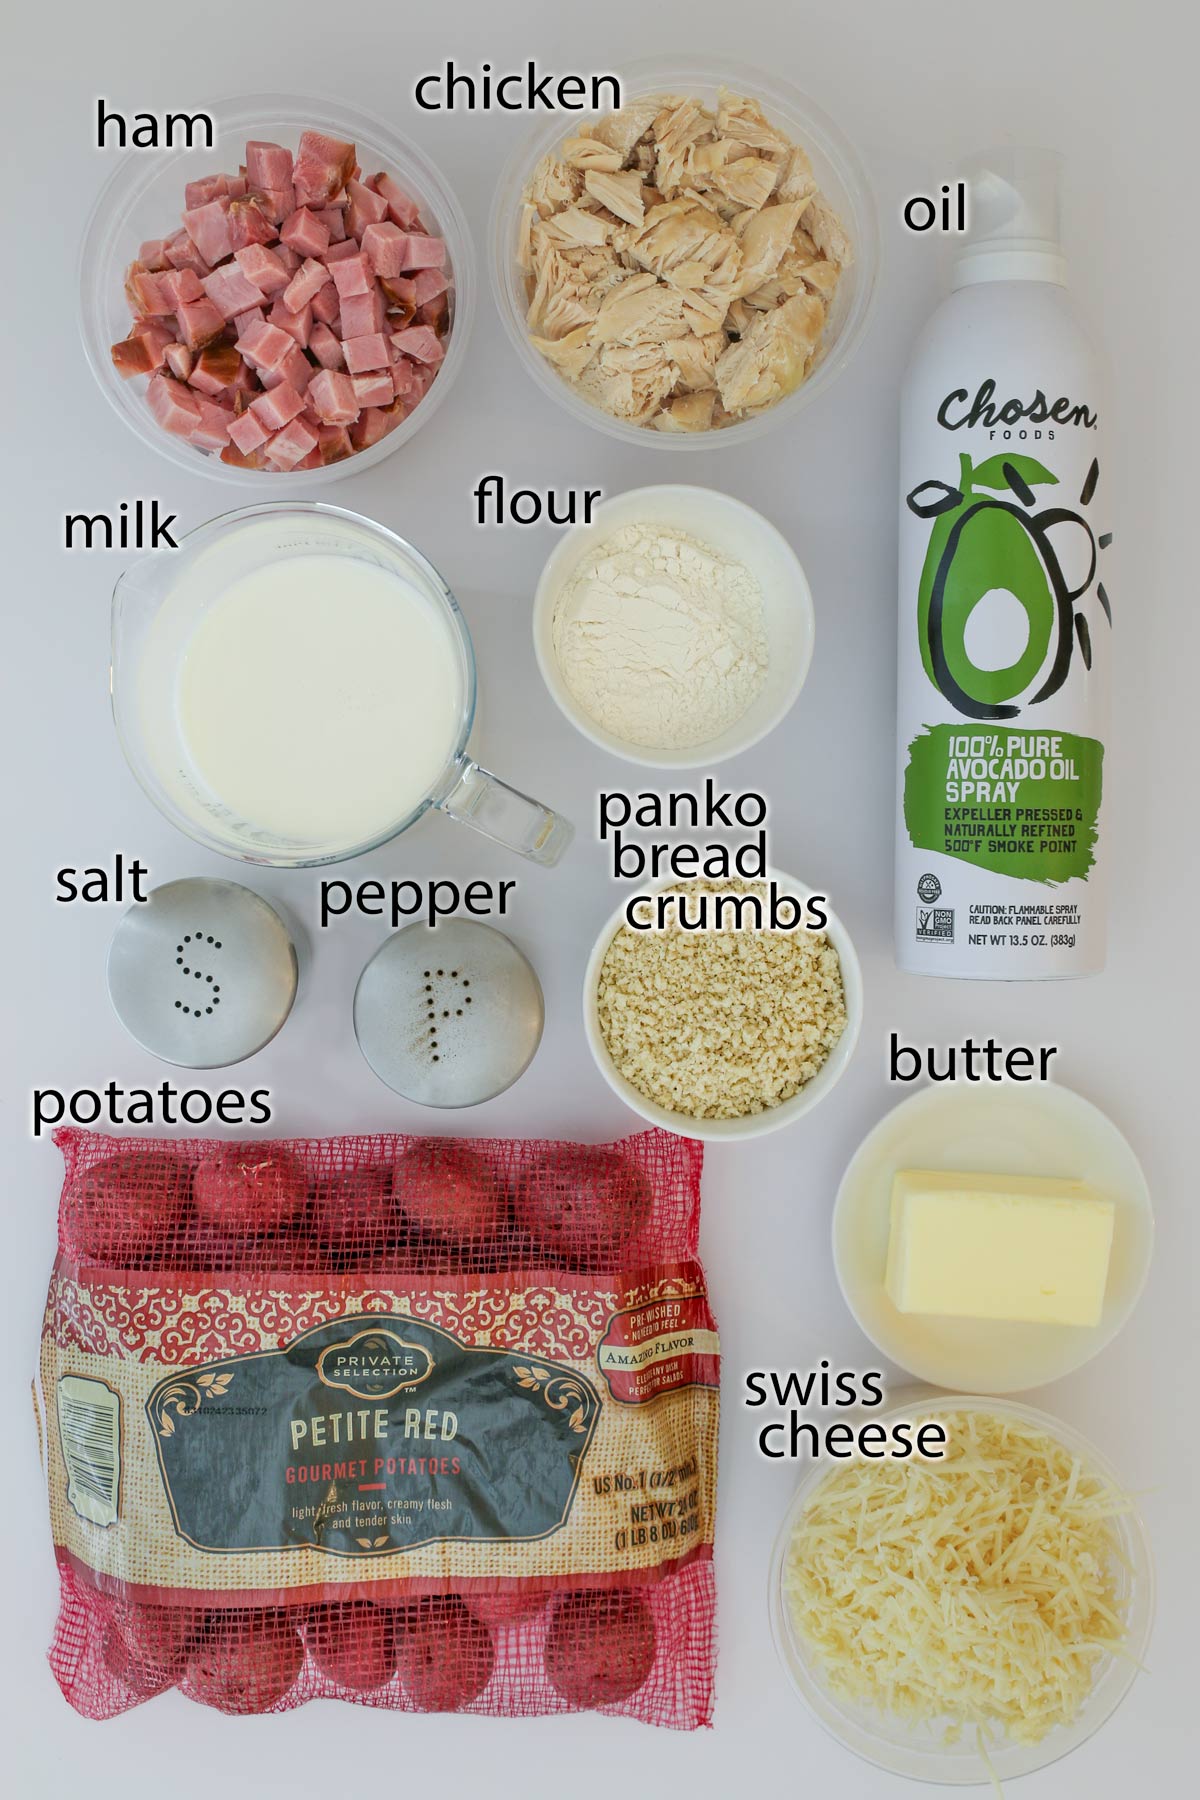 ingredients for chicken cordon bleu casserole laid out on a white counter.